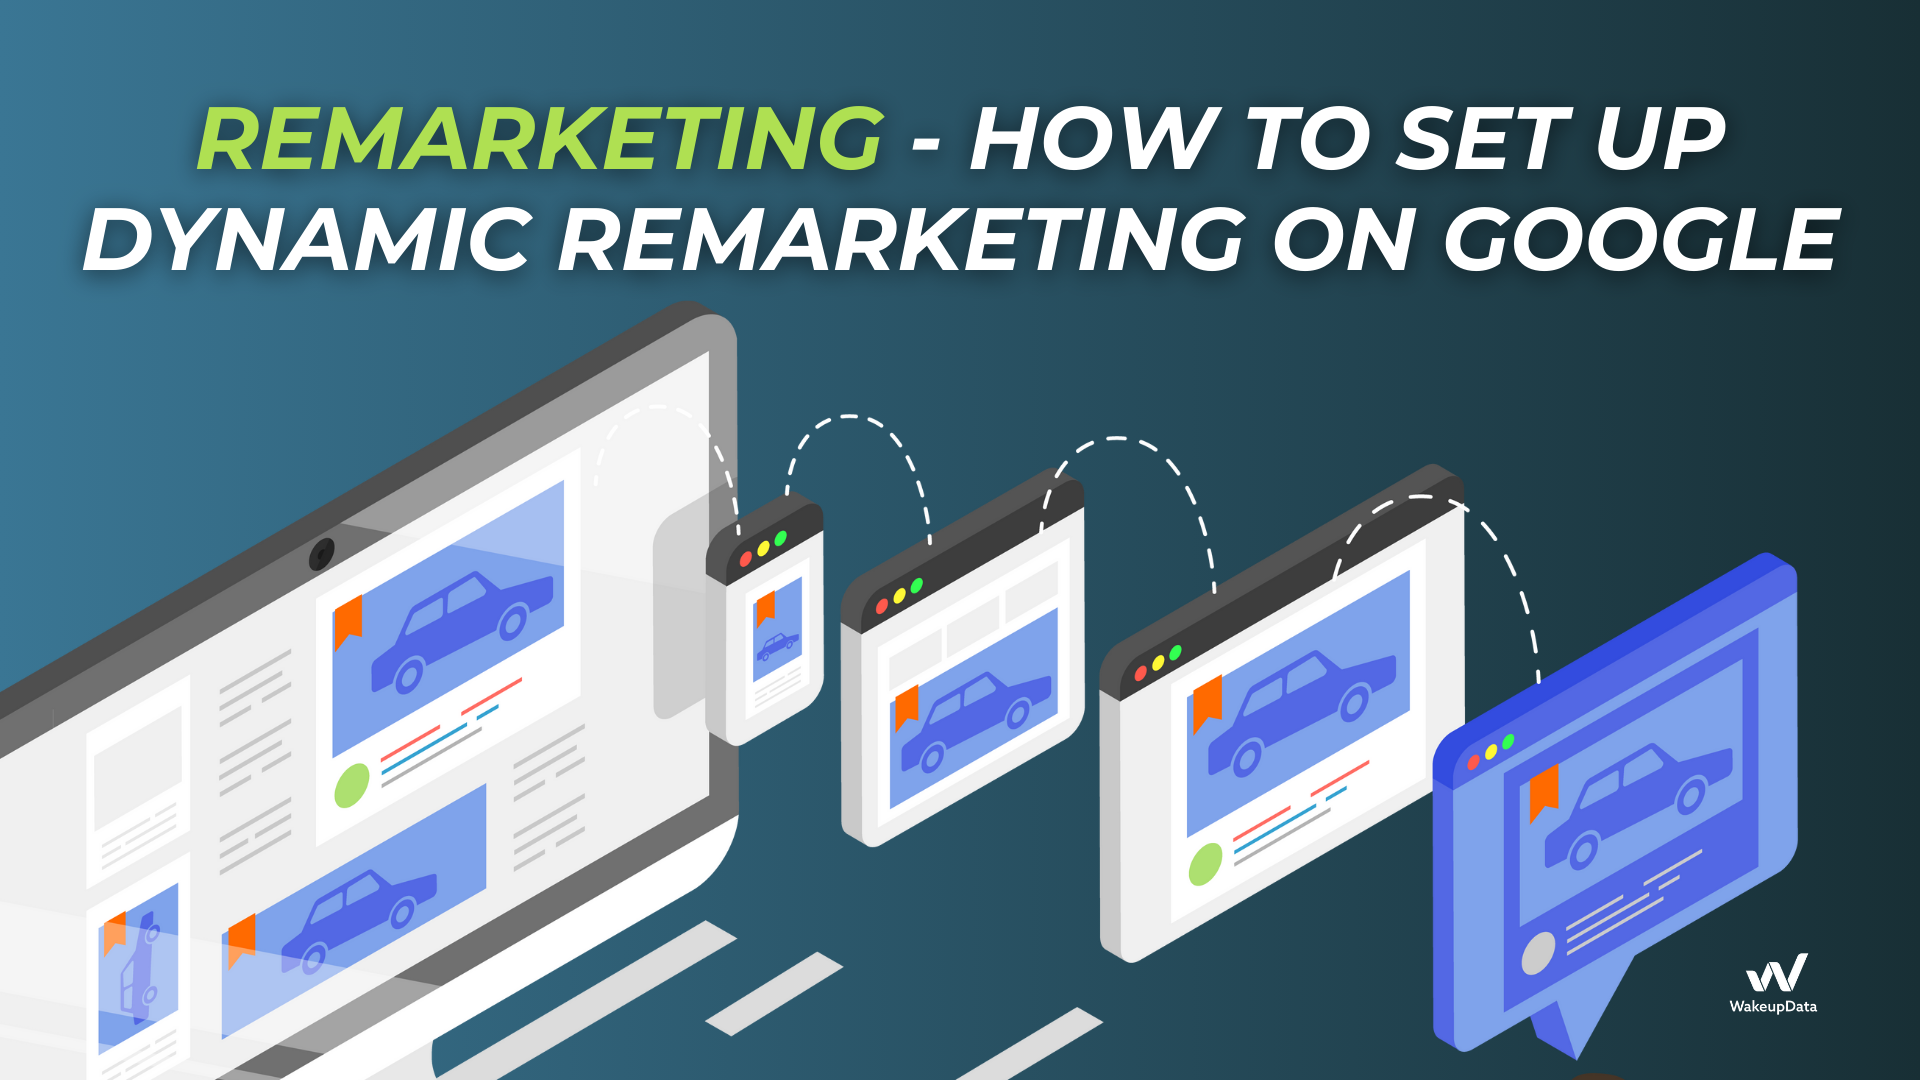 Remarketing - How to set up dynamic remarketing on Google